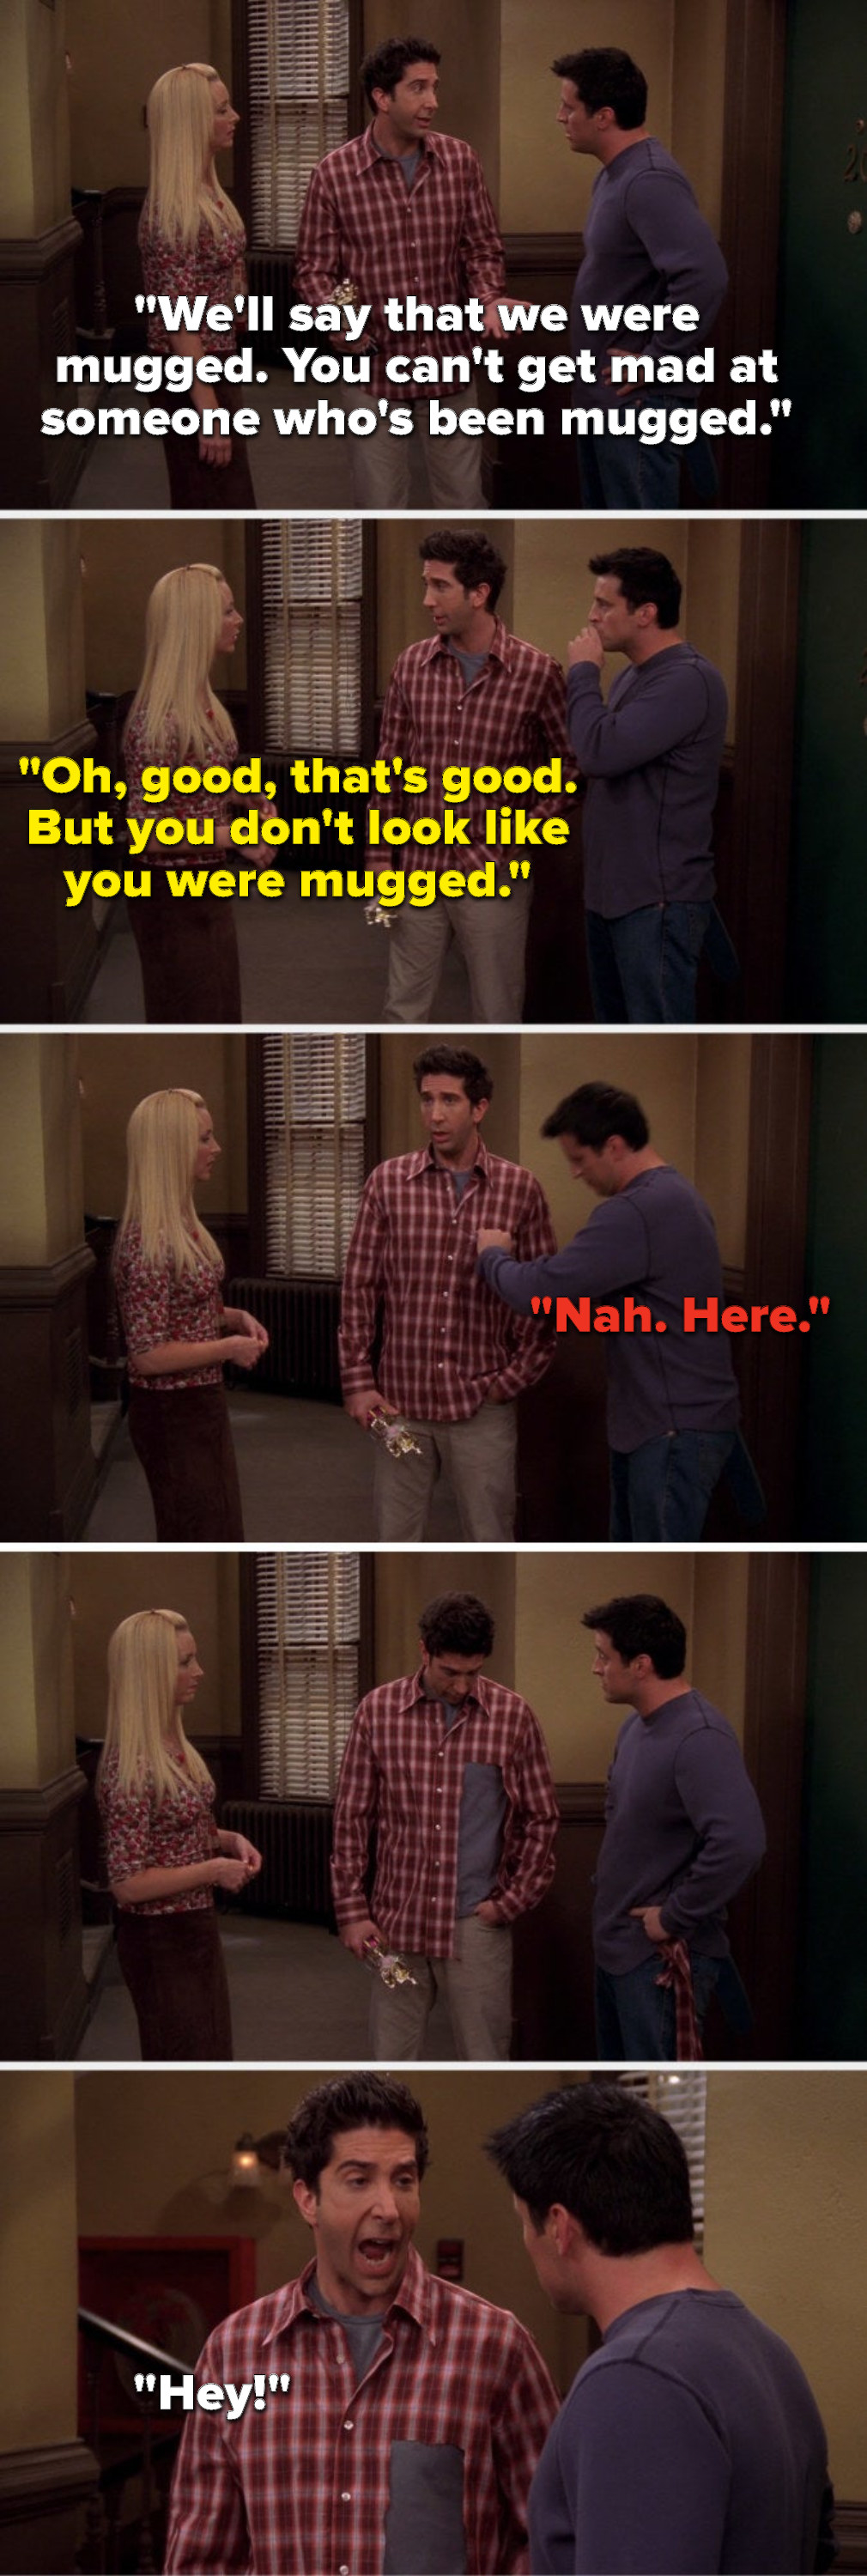 Ross says, &quot;We&#x27;ll say that we were mugged, you can&#x27;t get mad at someone who&#x27;s been mugged,&quot; Phoebe says, &quot;That&#x27;s good, but you don&#x27;t look like you were mugged,&quot; Joey says, &quot;Here,&quot; then he rips off a huge part of Ross&#x27;s shirt and Ross yells, &quot;Hey&quot;